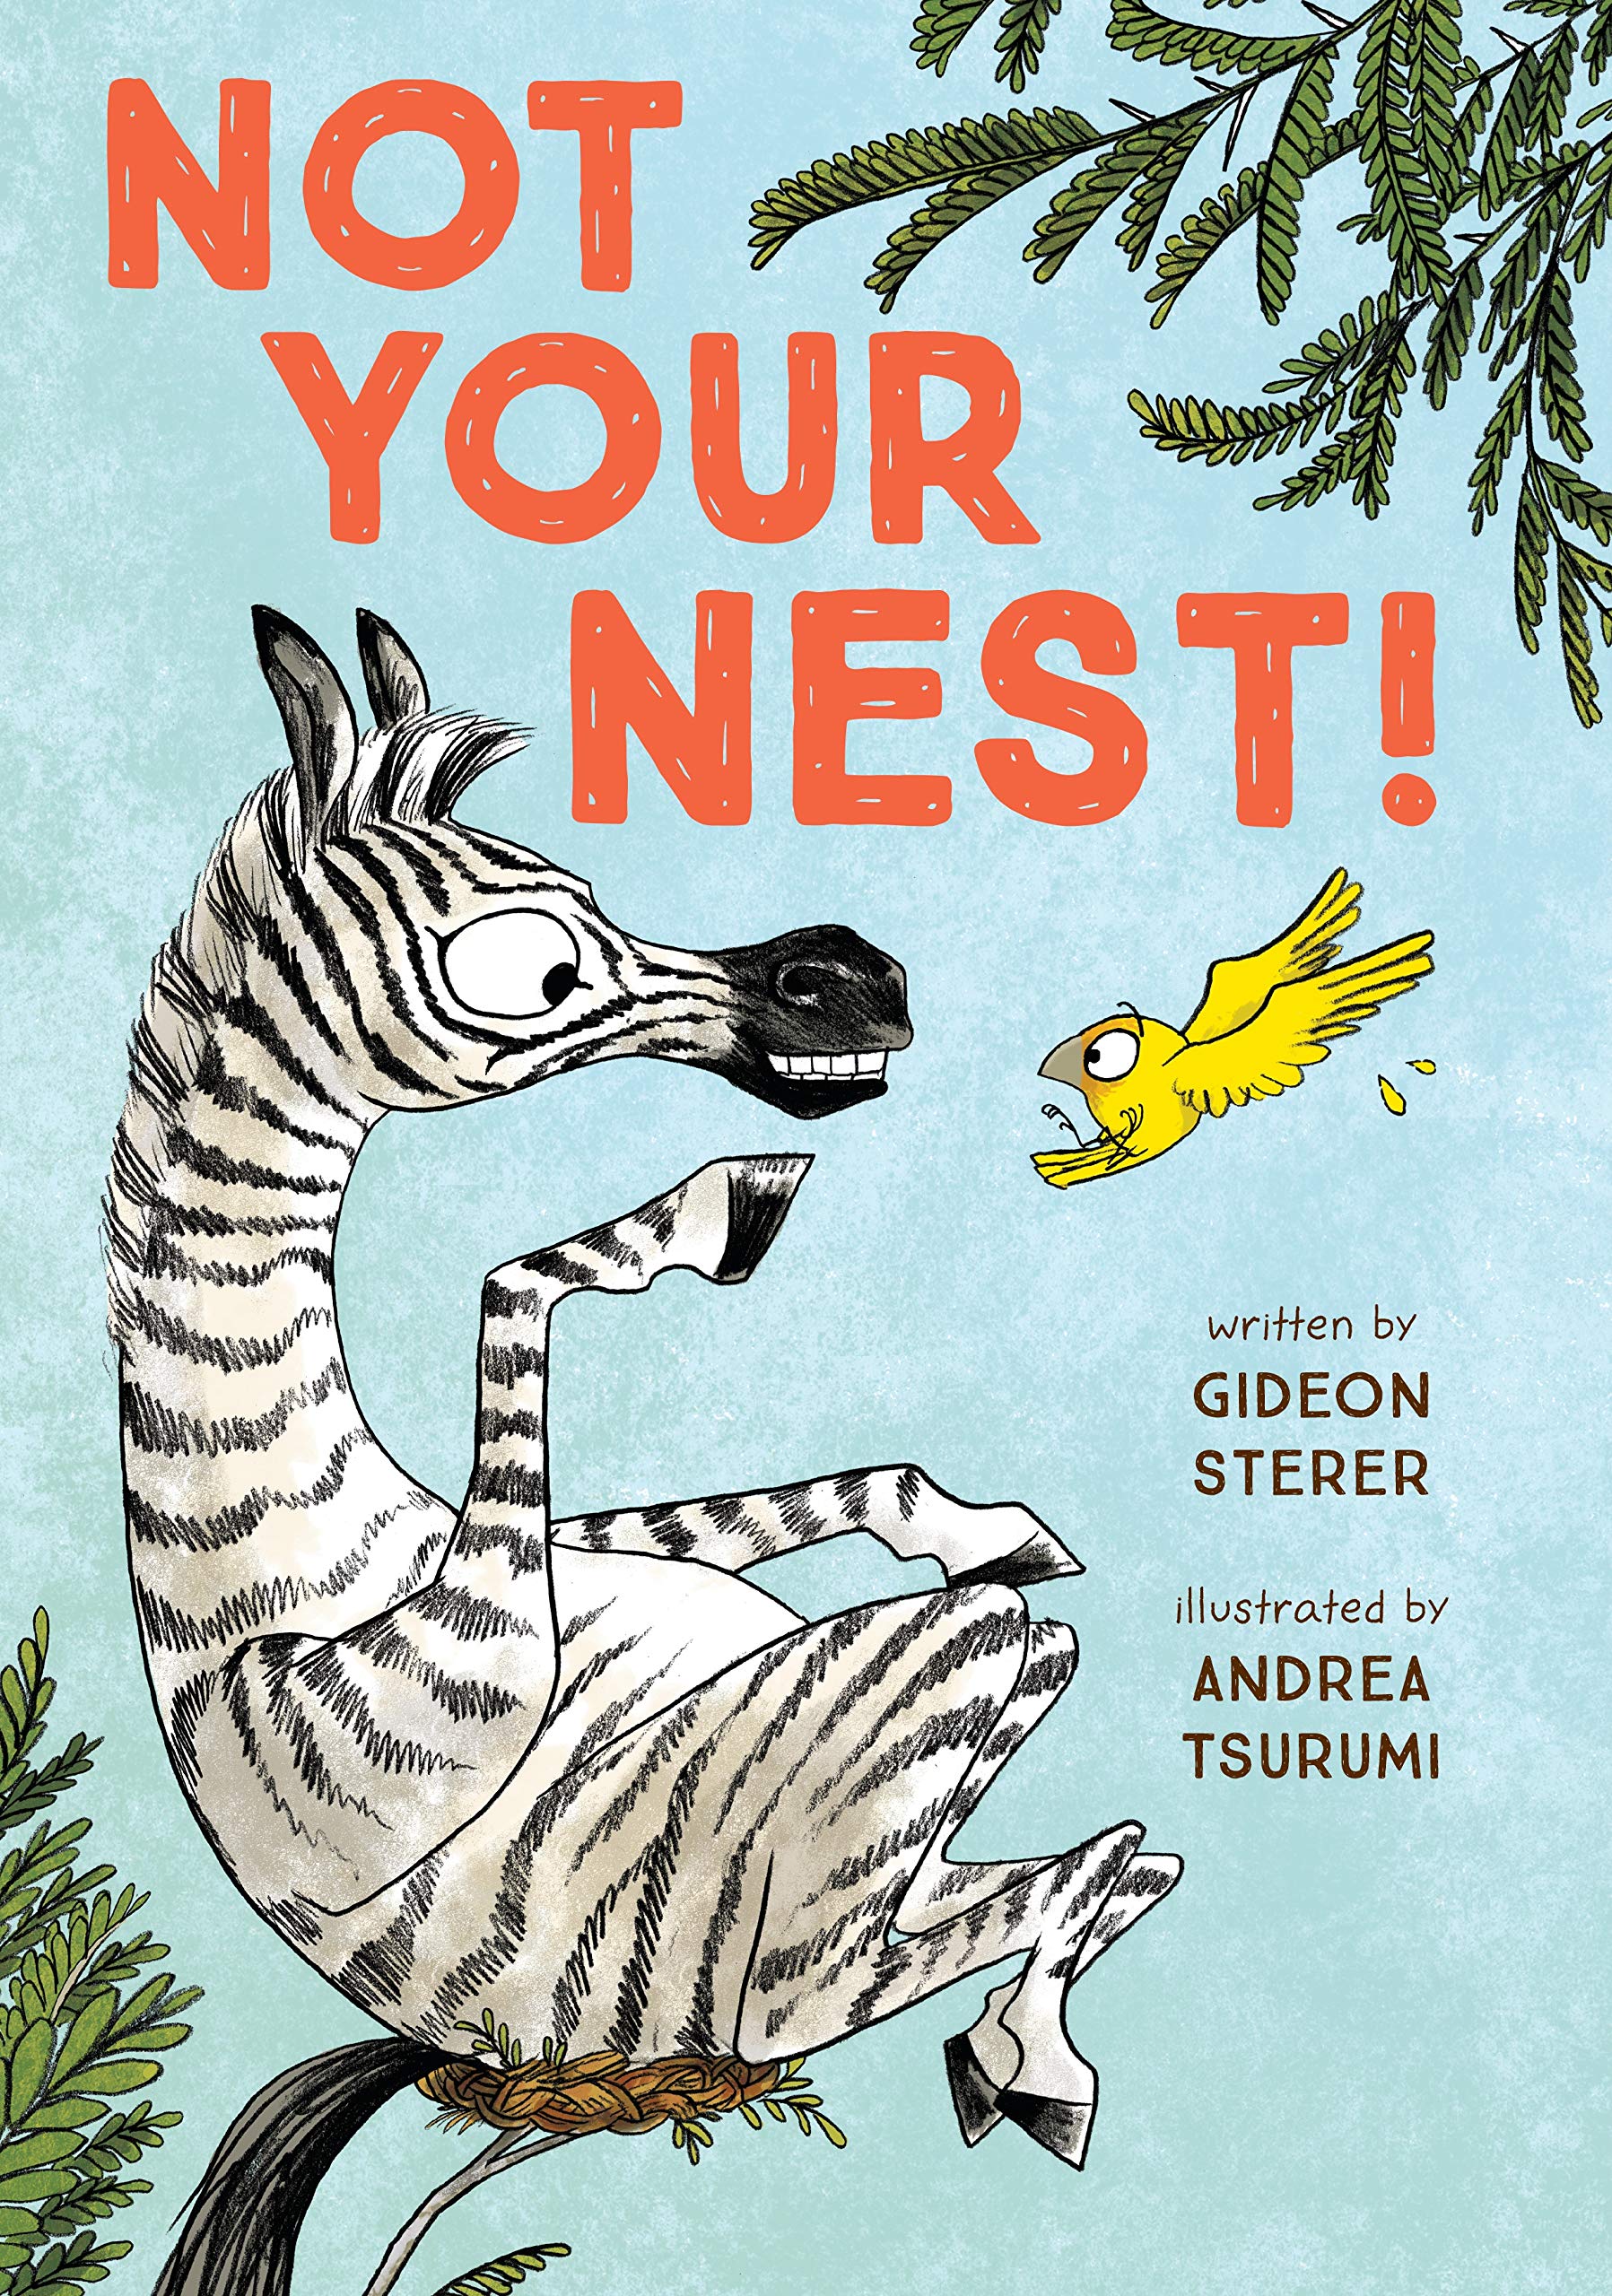 Not Your Nest by Gideon Sterer